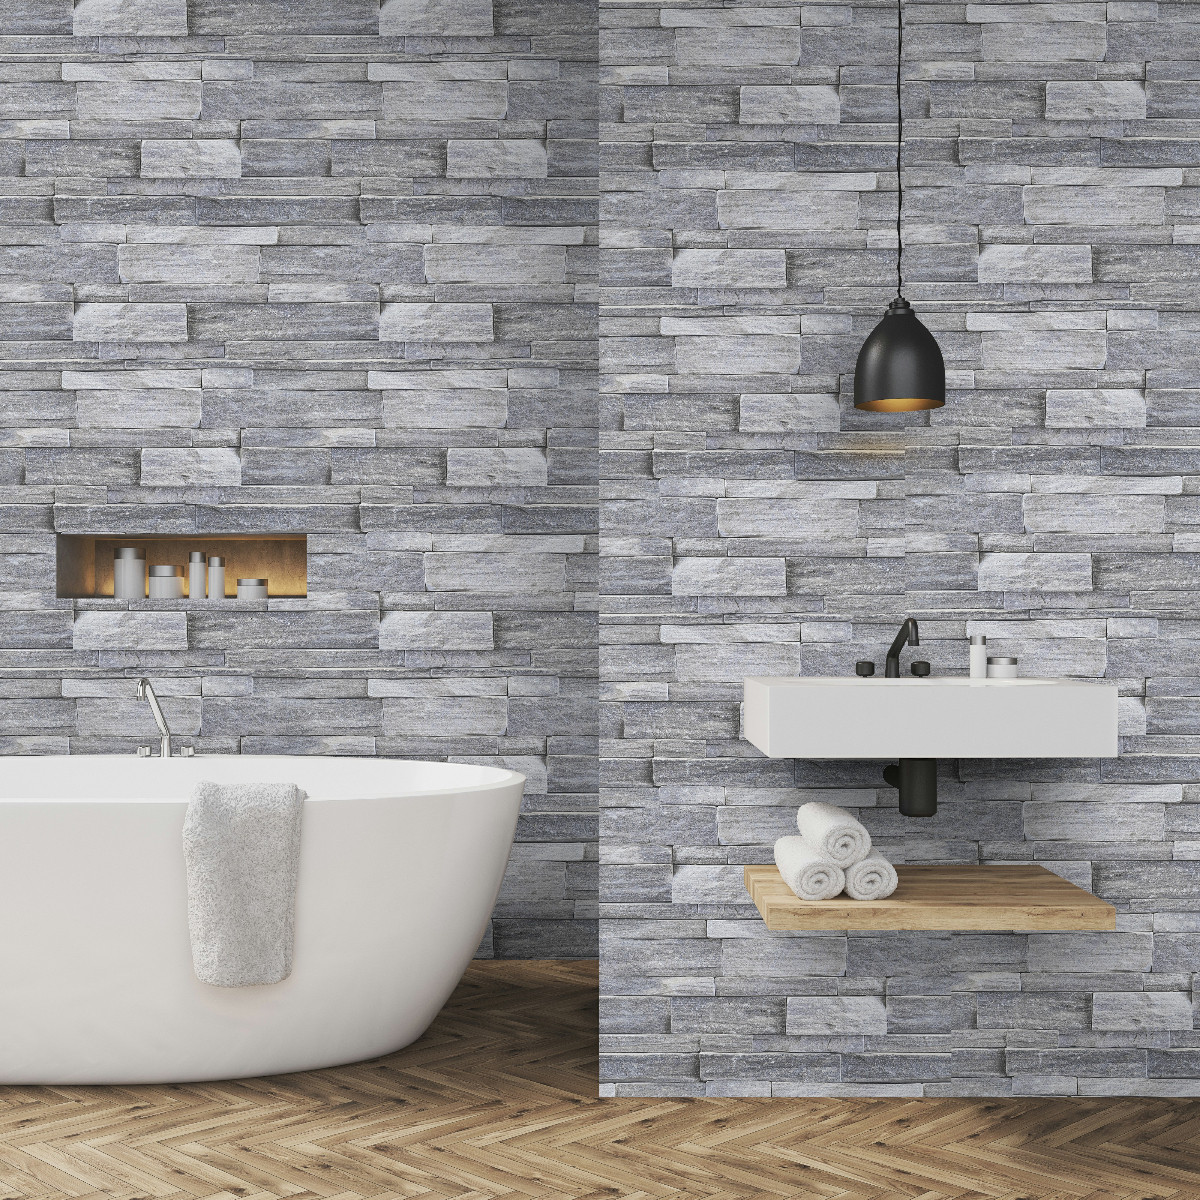 Graham And Brown Stone Wall Wallpaper - Grey Stone Wall In Bathroom - HD Wallpaper 